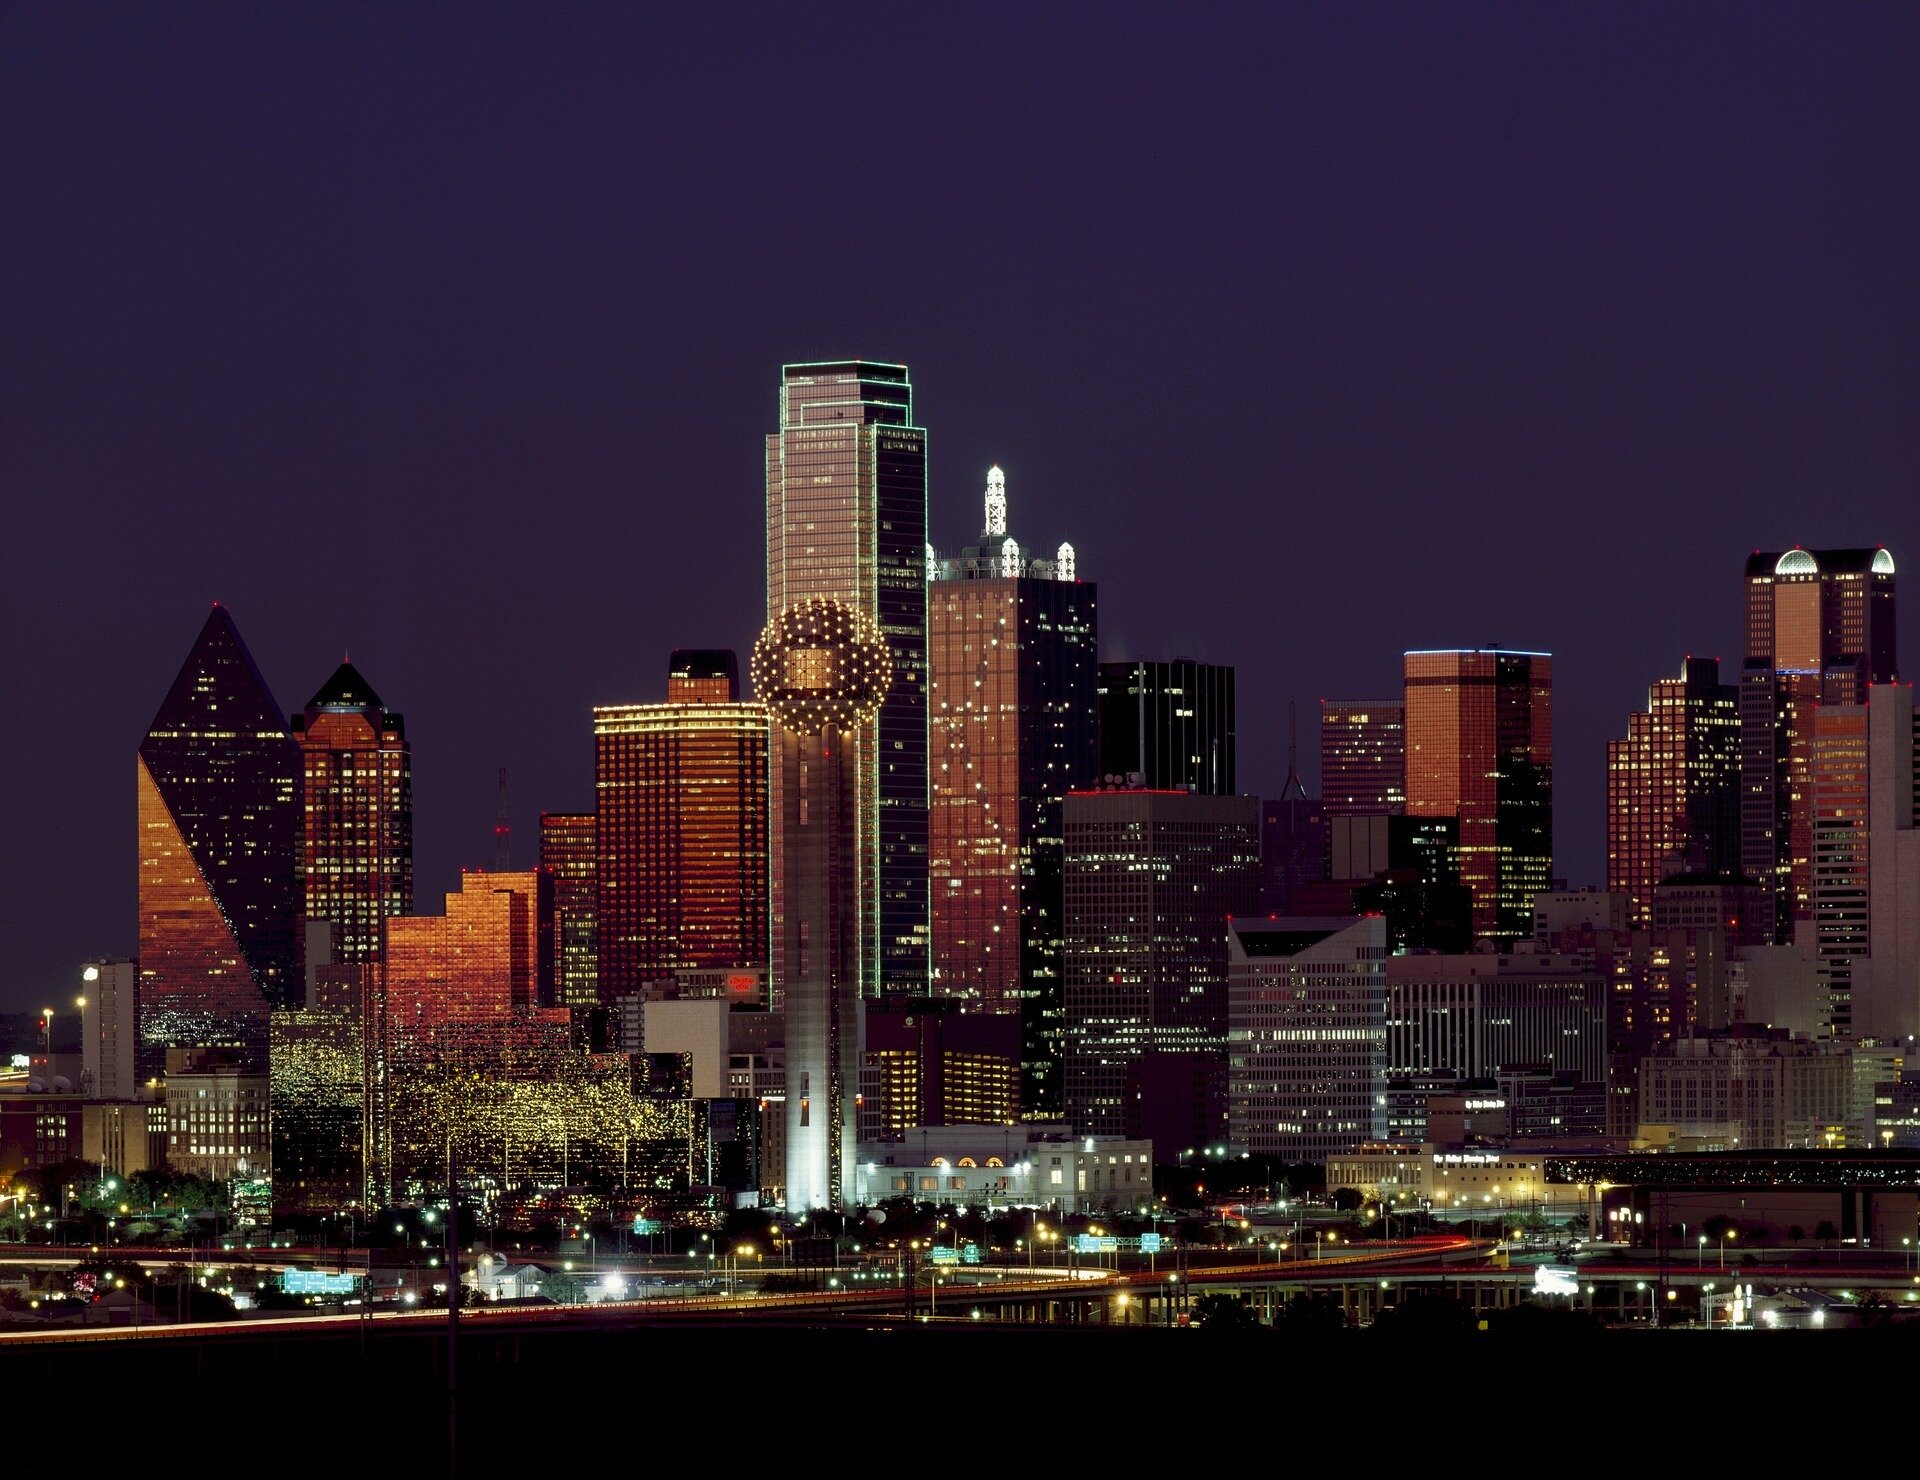 The Overwatch League heads to Dallas, Texas for its first Homestead Weekend this season. (Photo courtesy of Pixabay)